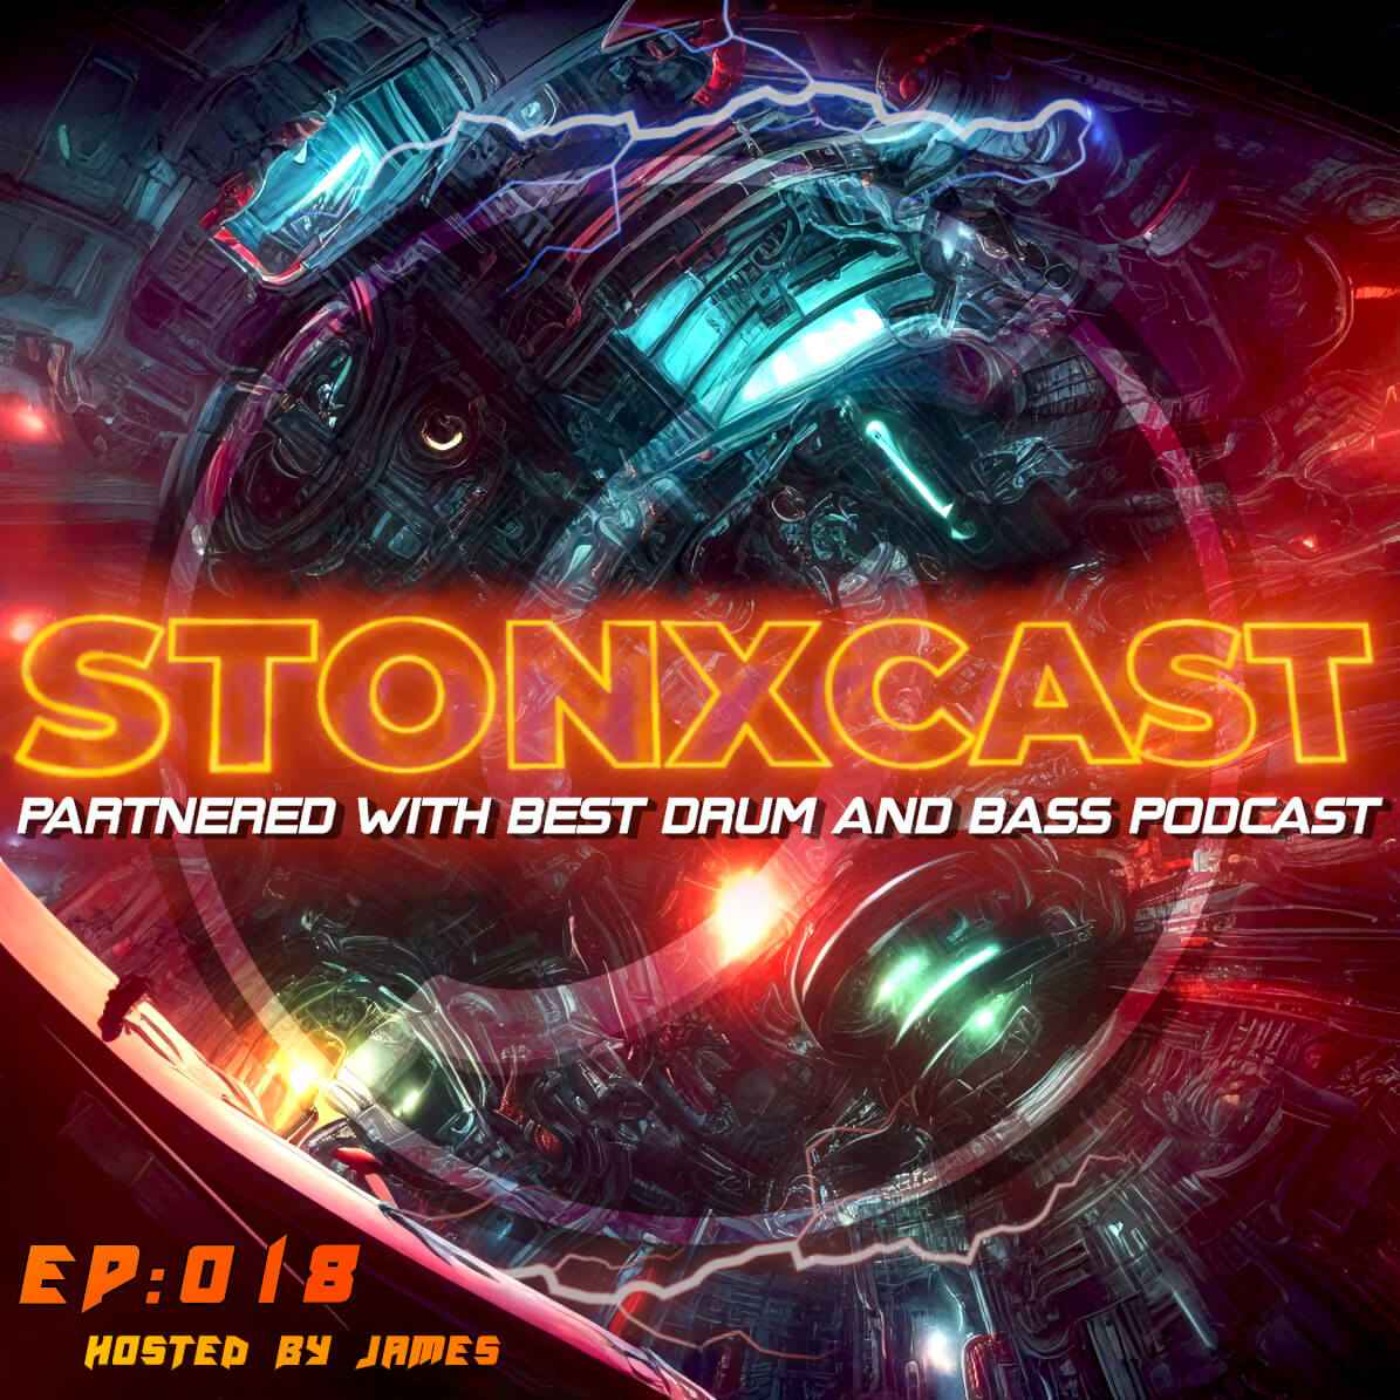 Stonxcast EP:018 hosted by James Artwork